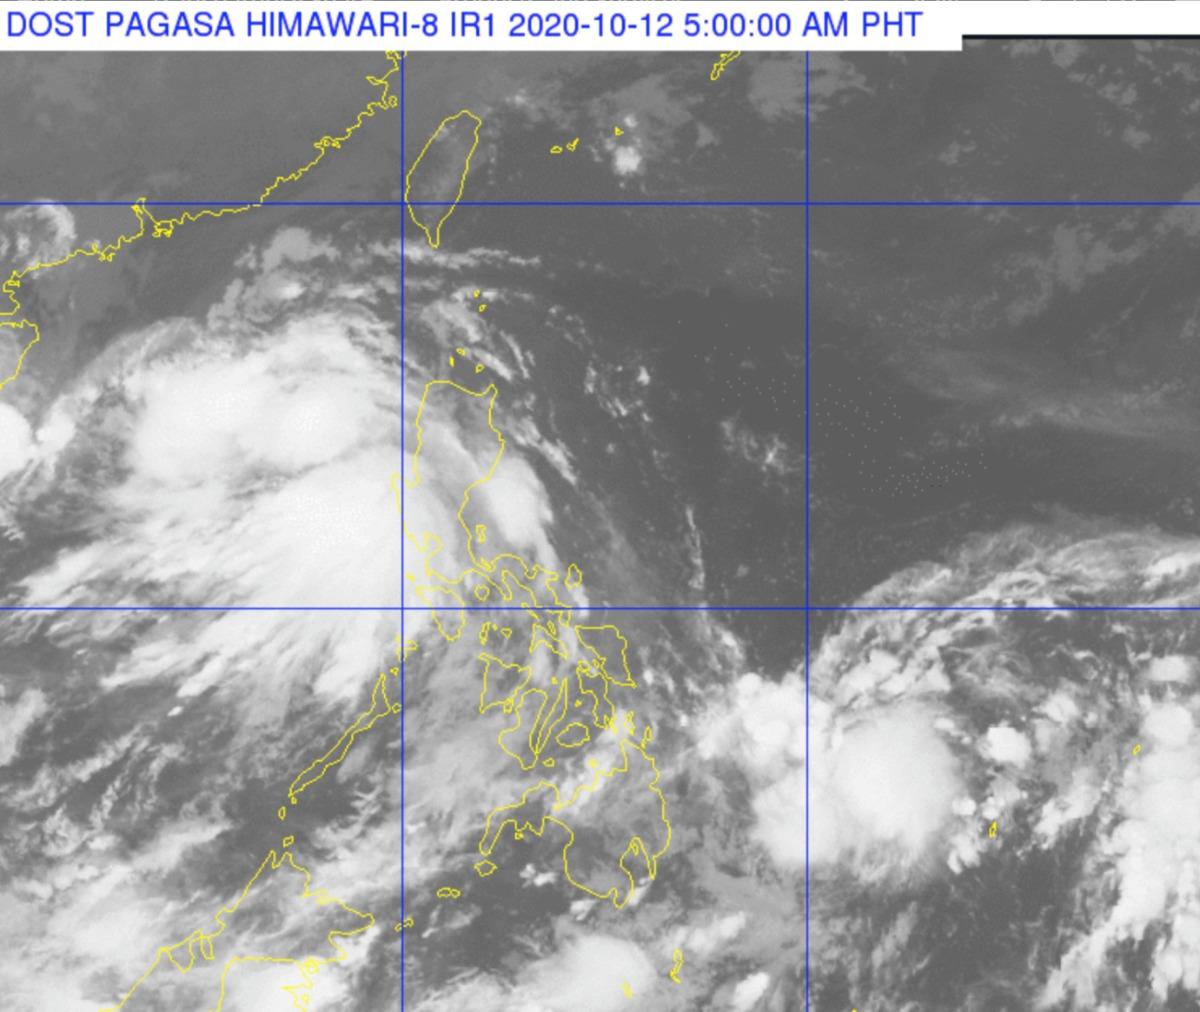 Nika, LPA, monsoon to cause rains over many parts of the country